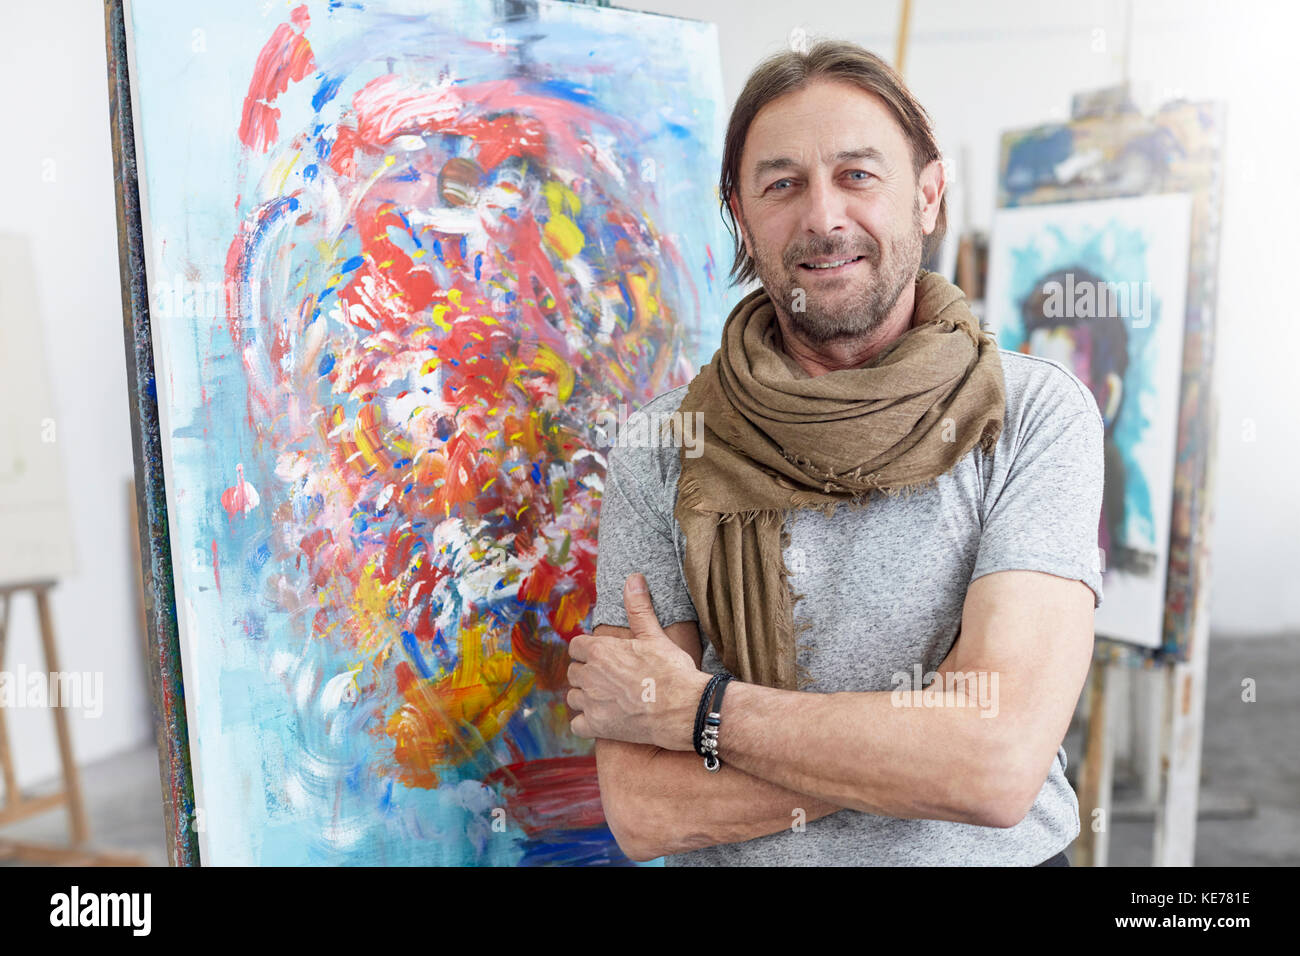 Portrait smiling, confident artist standing at abstract painting in art class studio Stock Photo